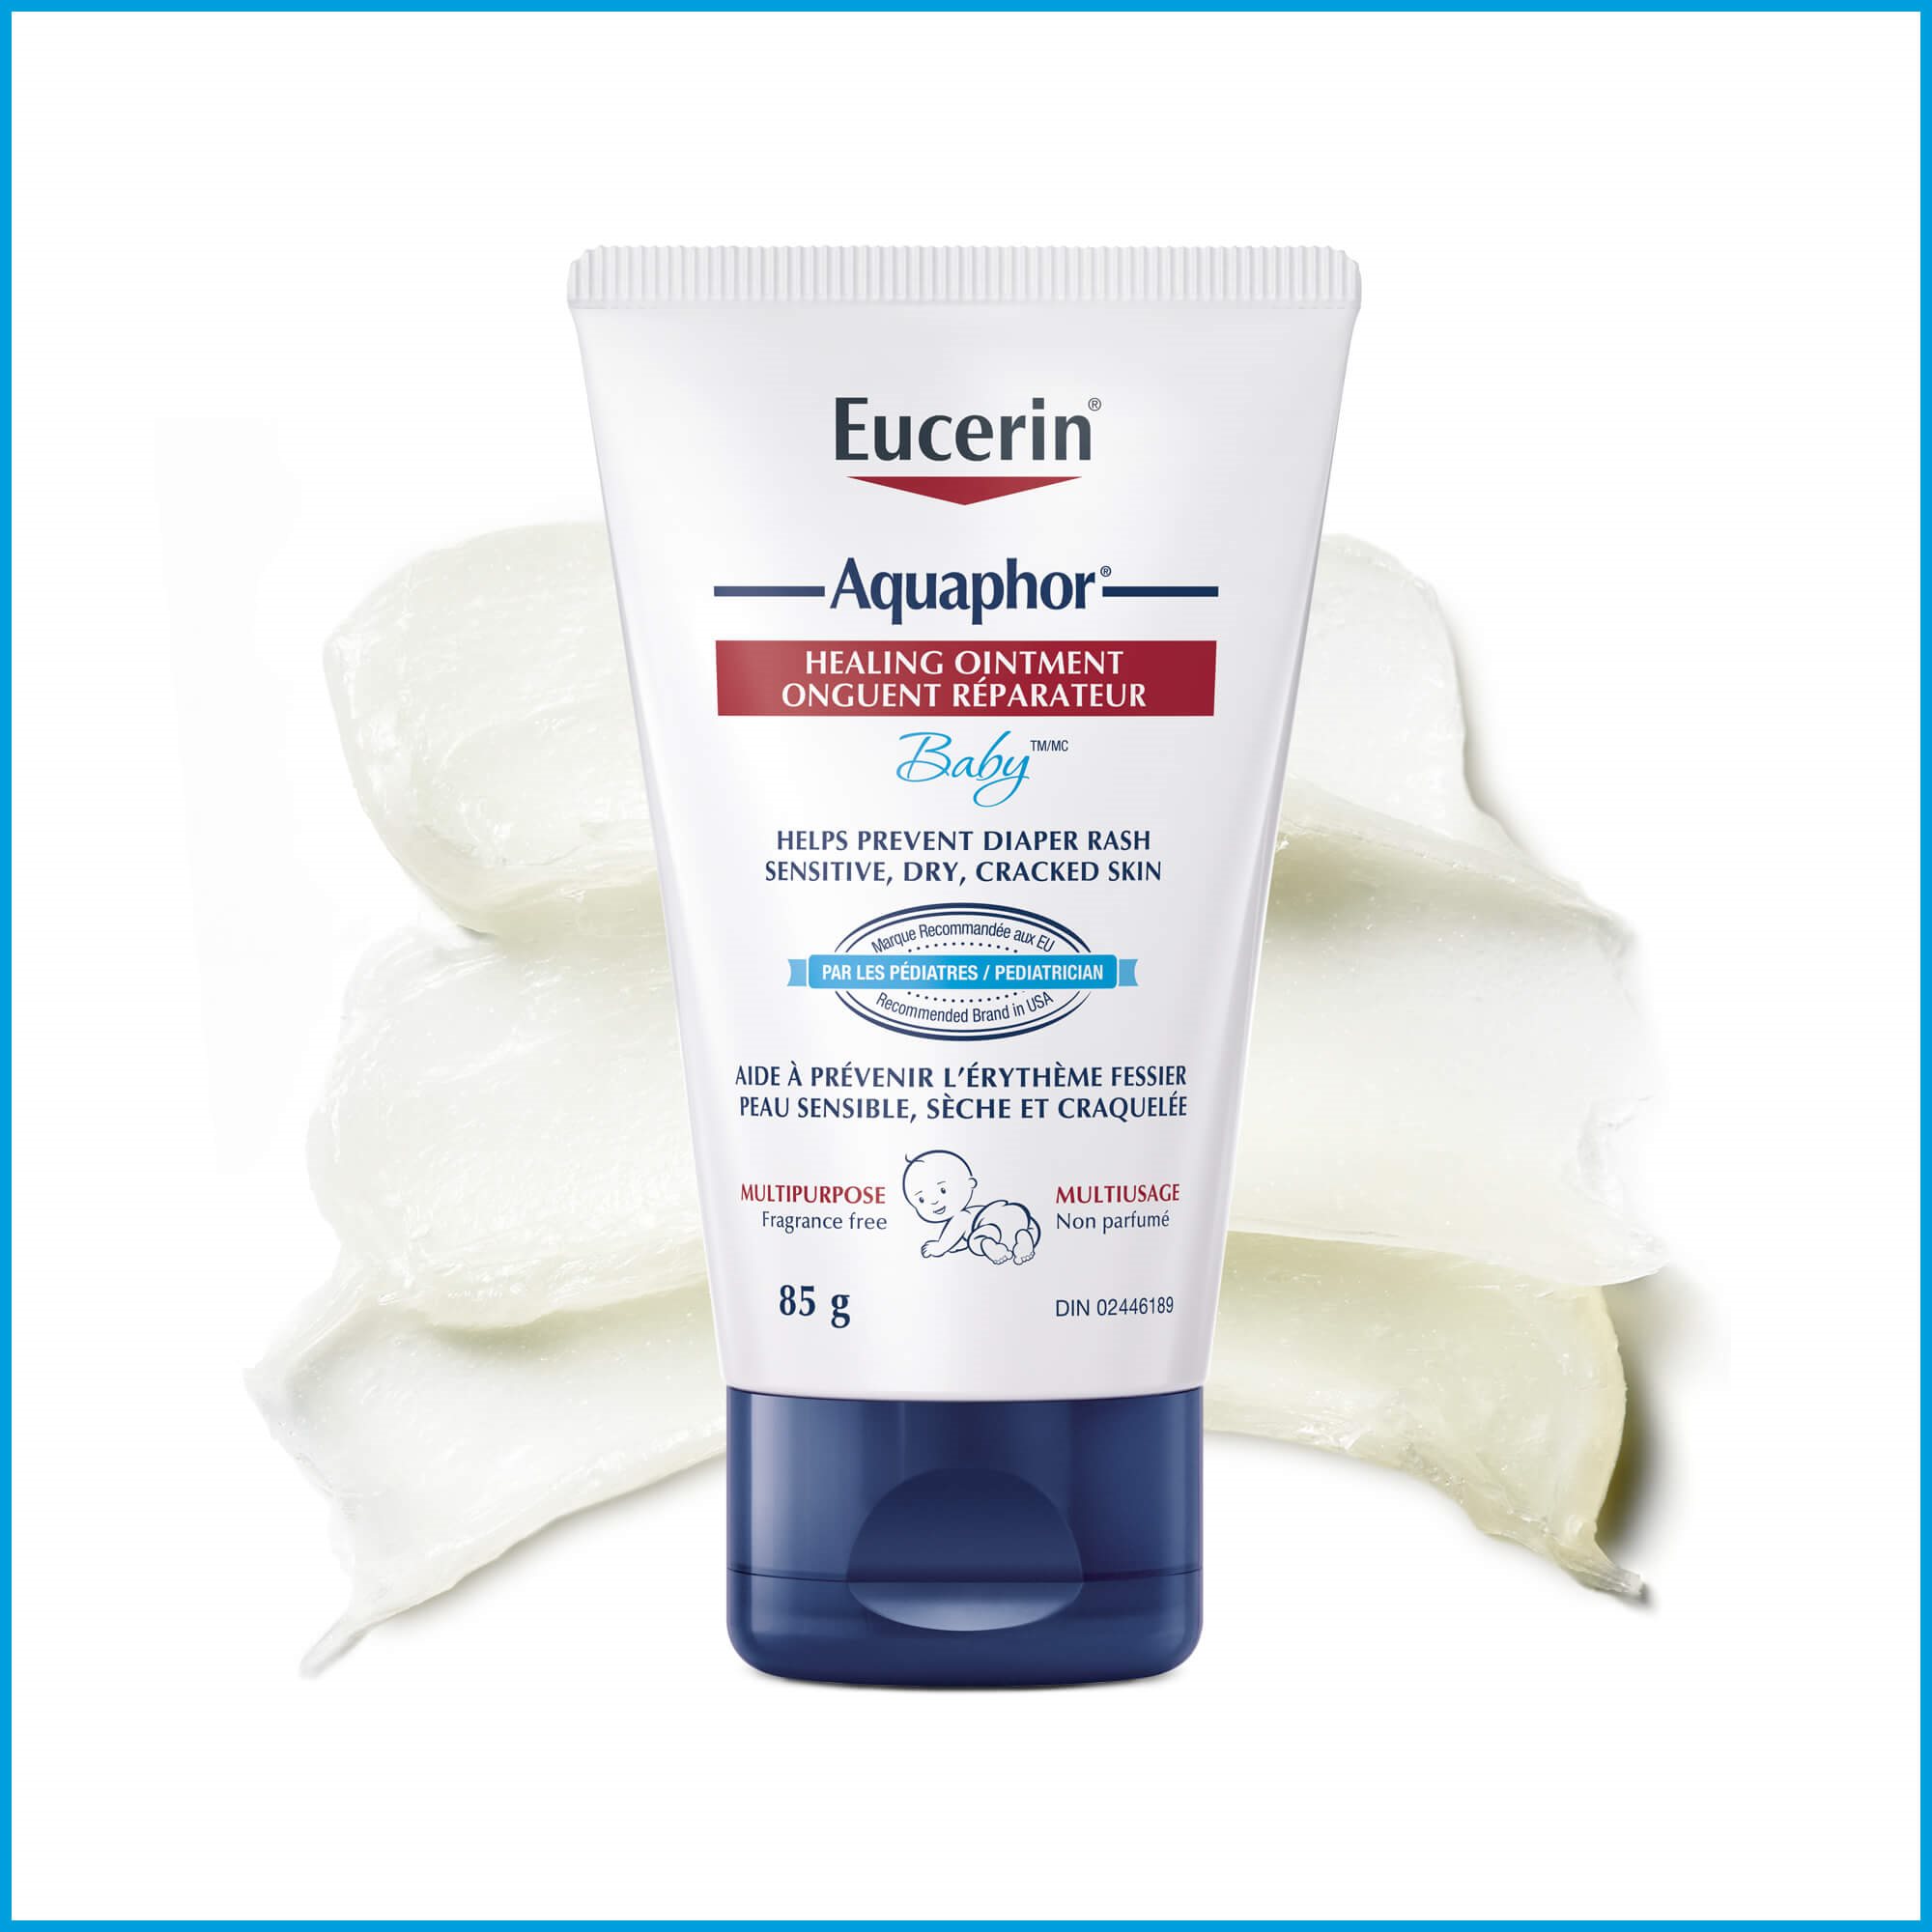 View of Eucerin Aquaphor healing ointment 85g with product smeared behind against a white background.